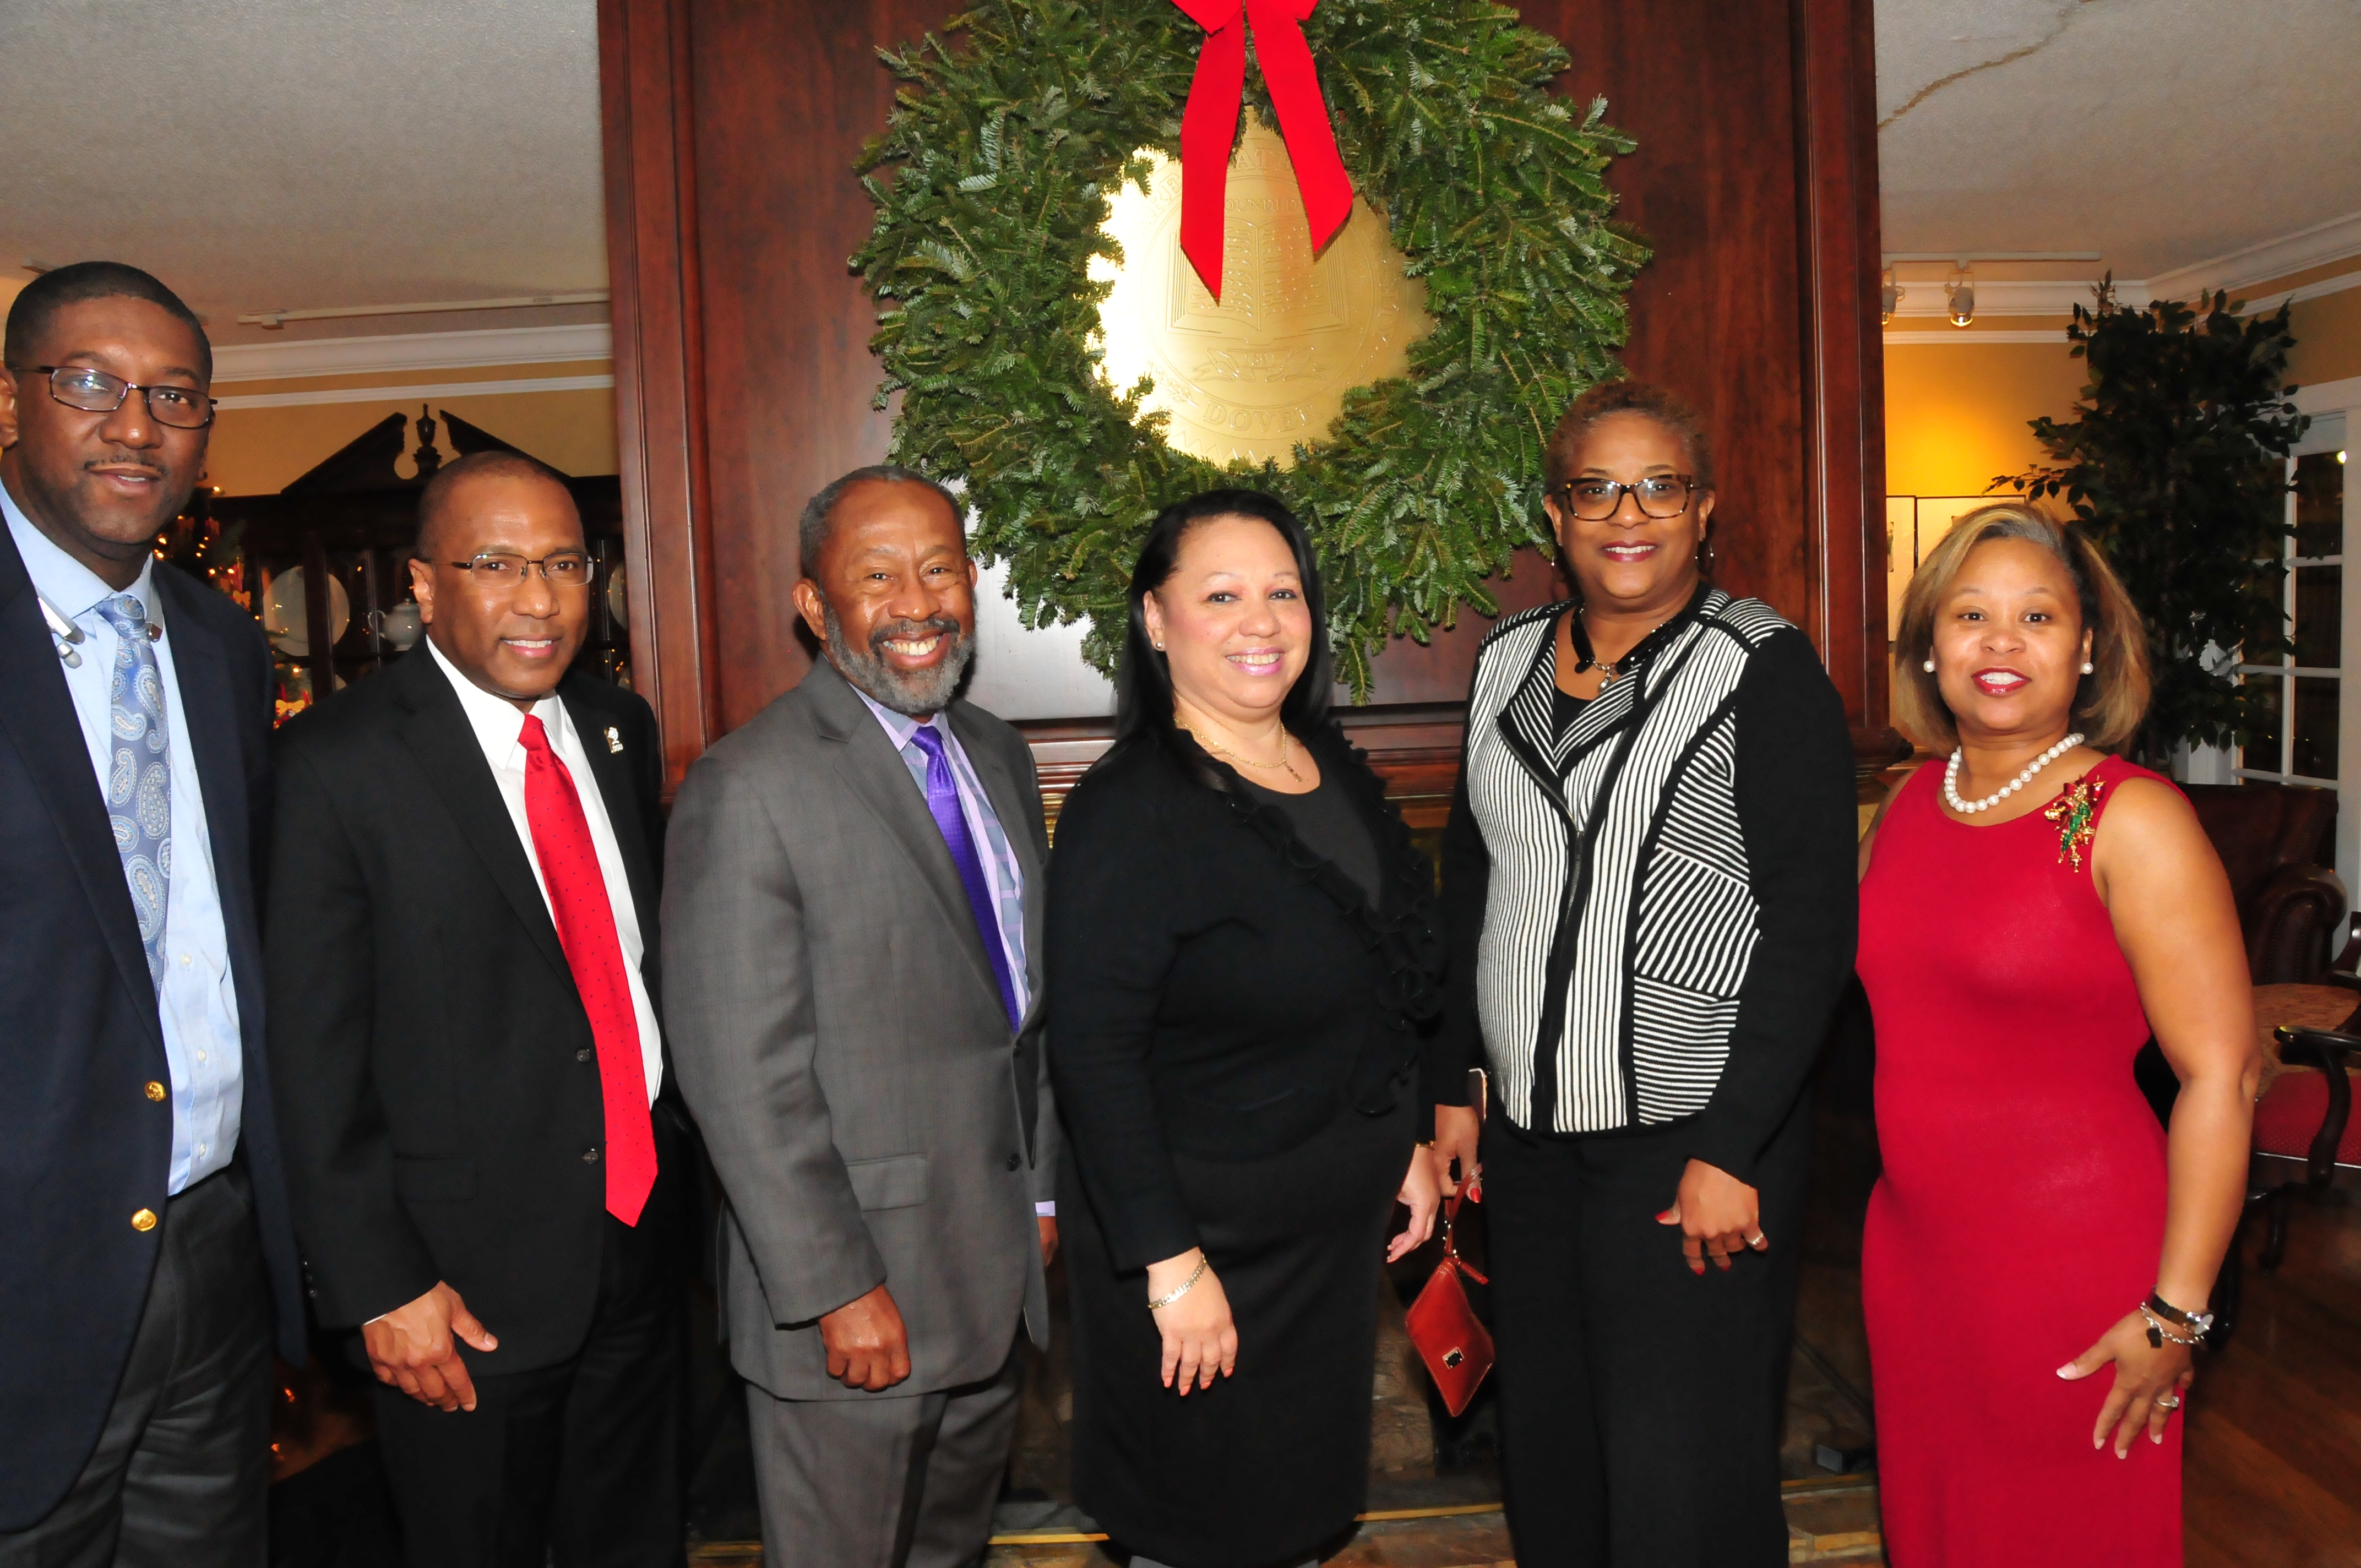 These DSU employees were one of many who took advantage of one more opportunity to get their picture taken with the DSU president and the First Lady during the annual Christmas Open House.